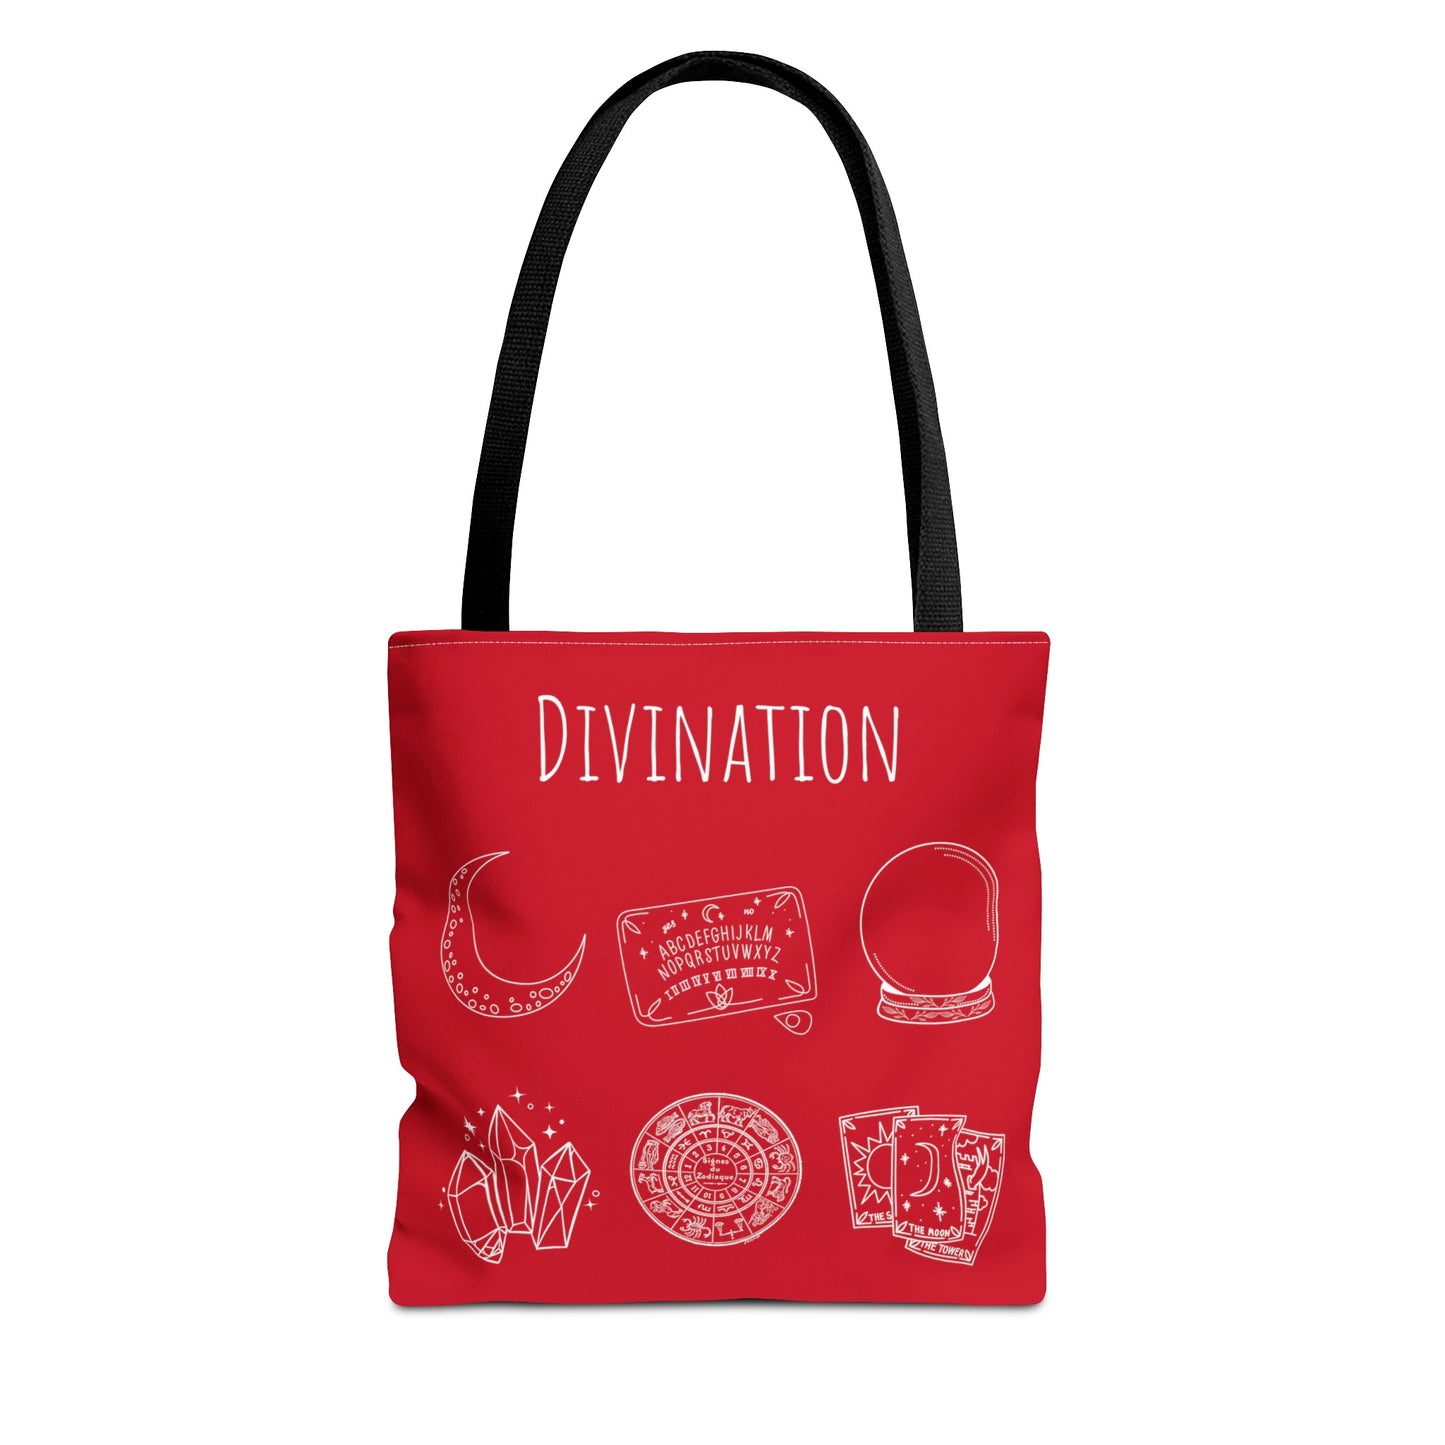 Divination Tote Bag (Magical Studies Collection)